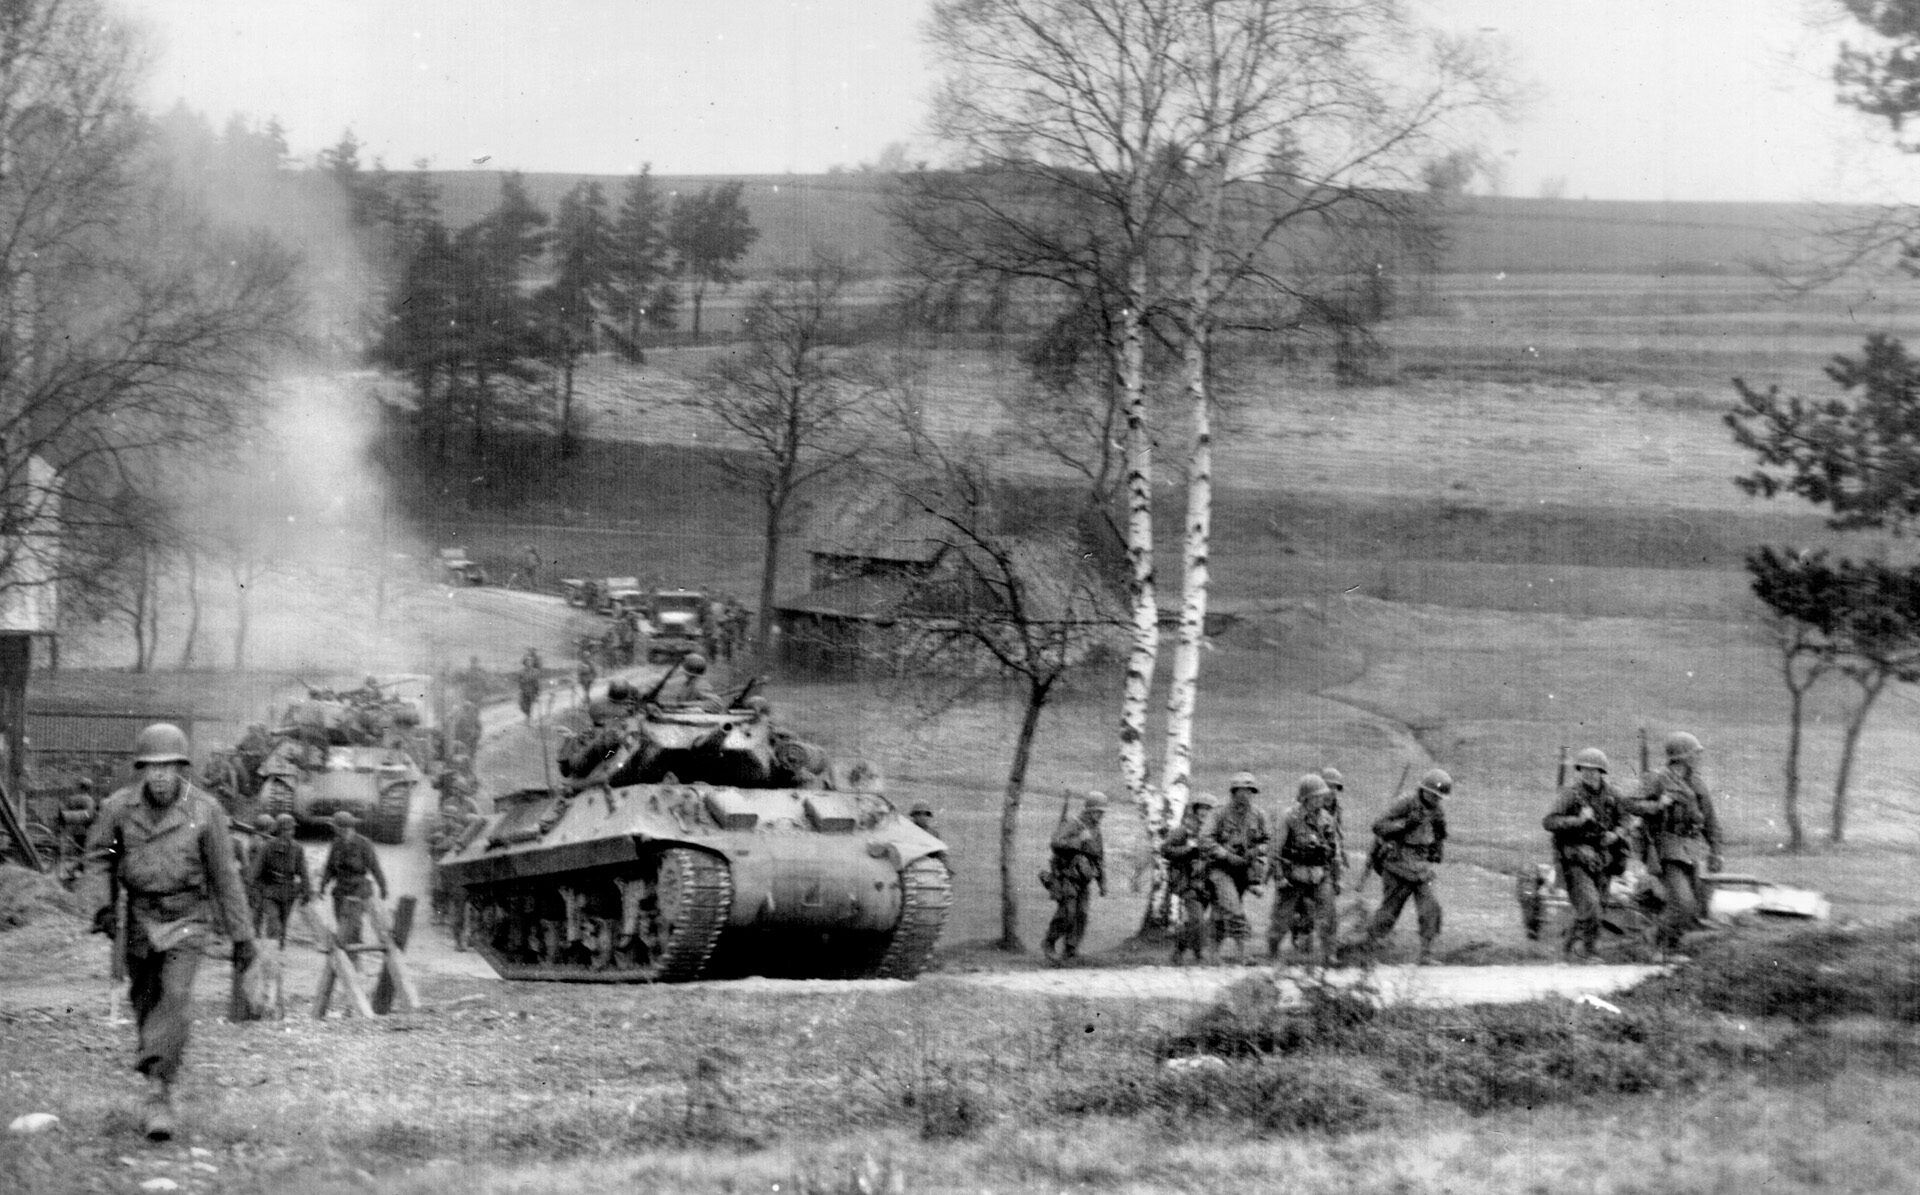 Sherman tanks and Patton’s Third Army infantrymen advance together across the German-Czech border, April 1945. The relationship between the two forces was beneficial for both. 